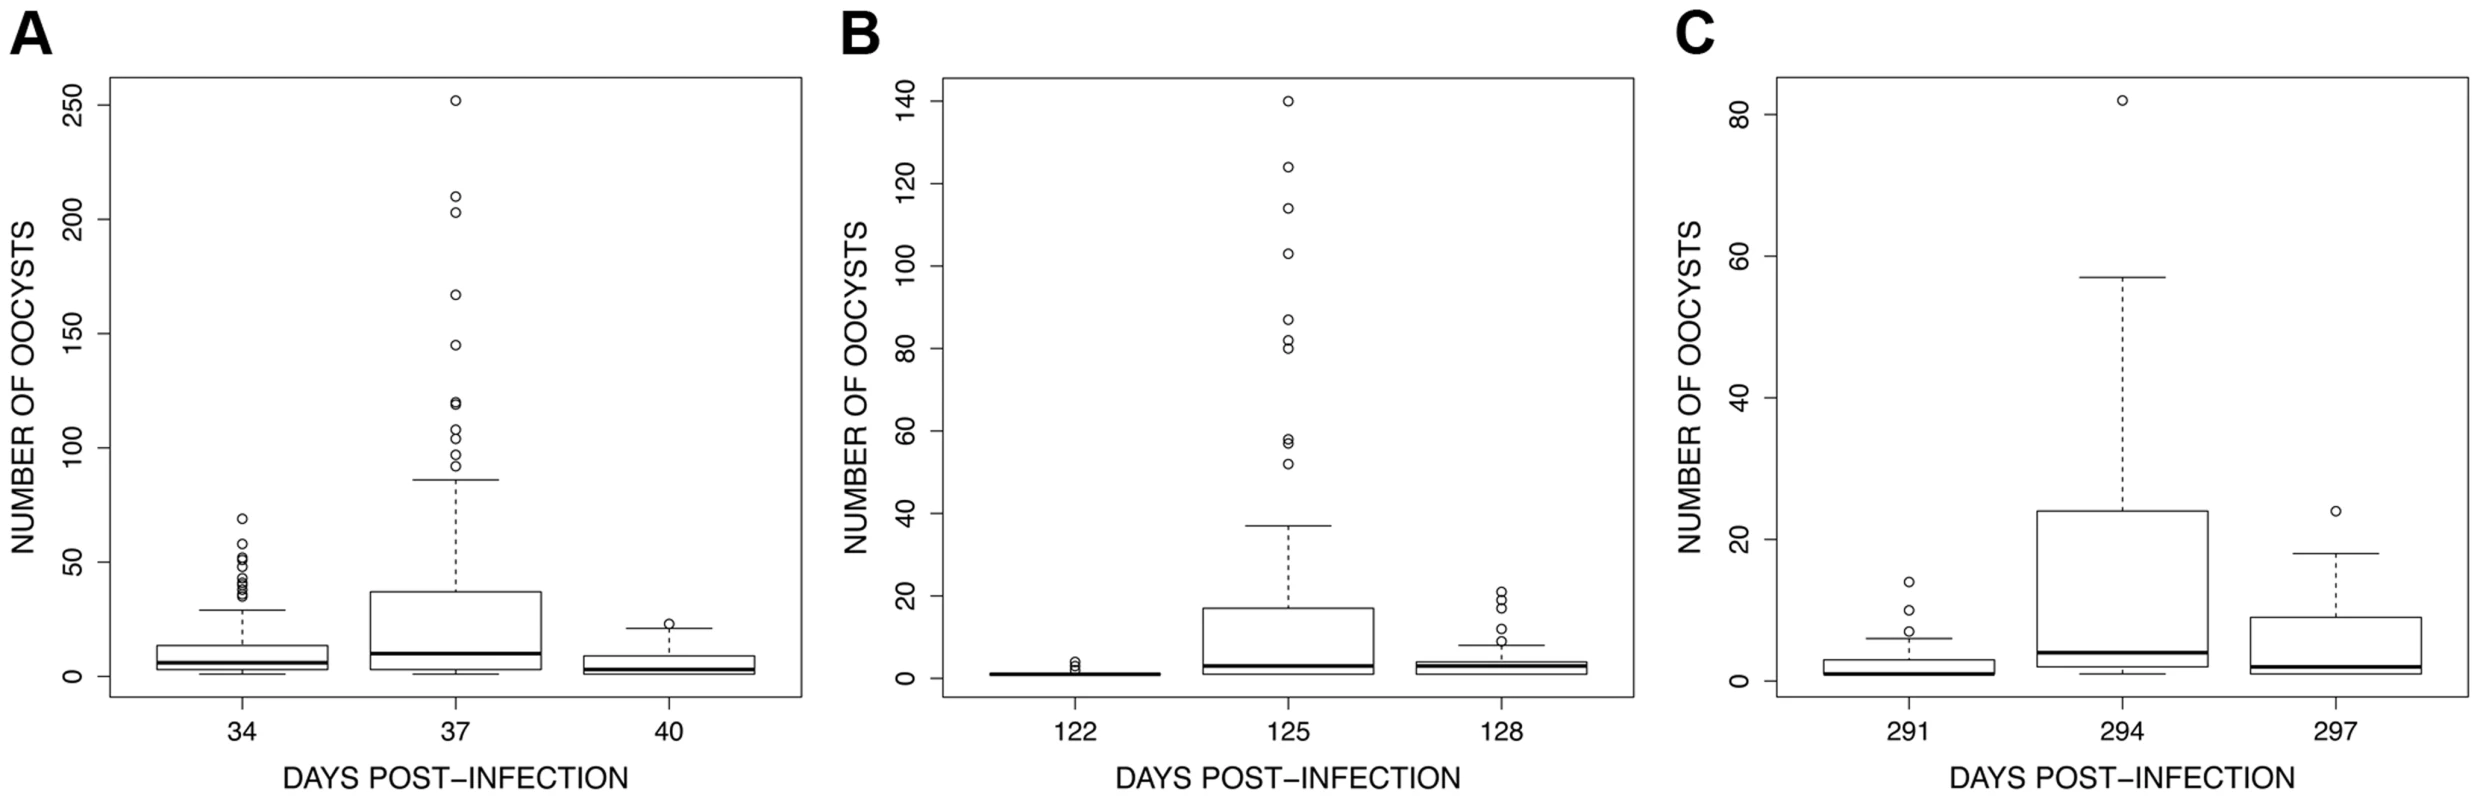 Boxplot of the number of oocysts per midgut among 15 haphazardly chosen blood fed individuals on each bird (only includes mosquitoes harbouring ≥1 oocysts) for the 3 exposure sessions (see &lt;em class=&quot;ref&quot;&gt;Fig. 4&lt;/em&gt;): (A) session 1 (34–40 dpi), (B) session 2 (122–128 dpi) and (C) session 3 (291–297 dpi).